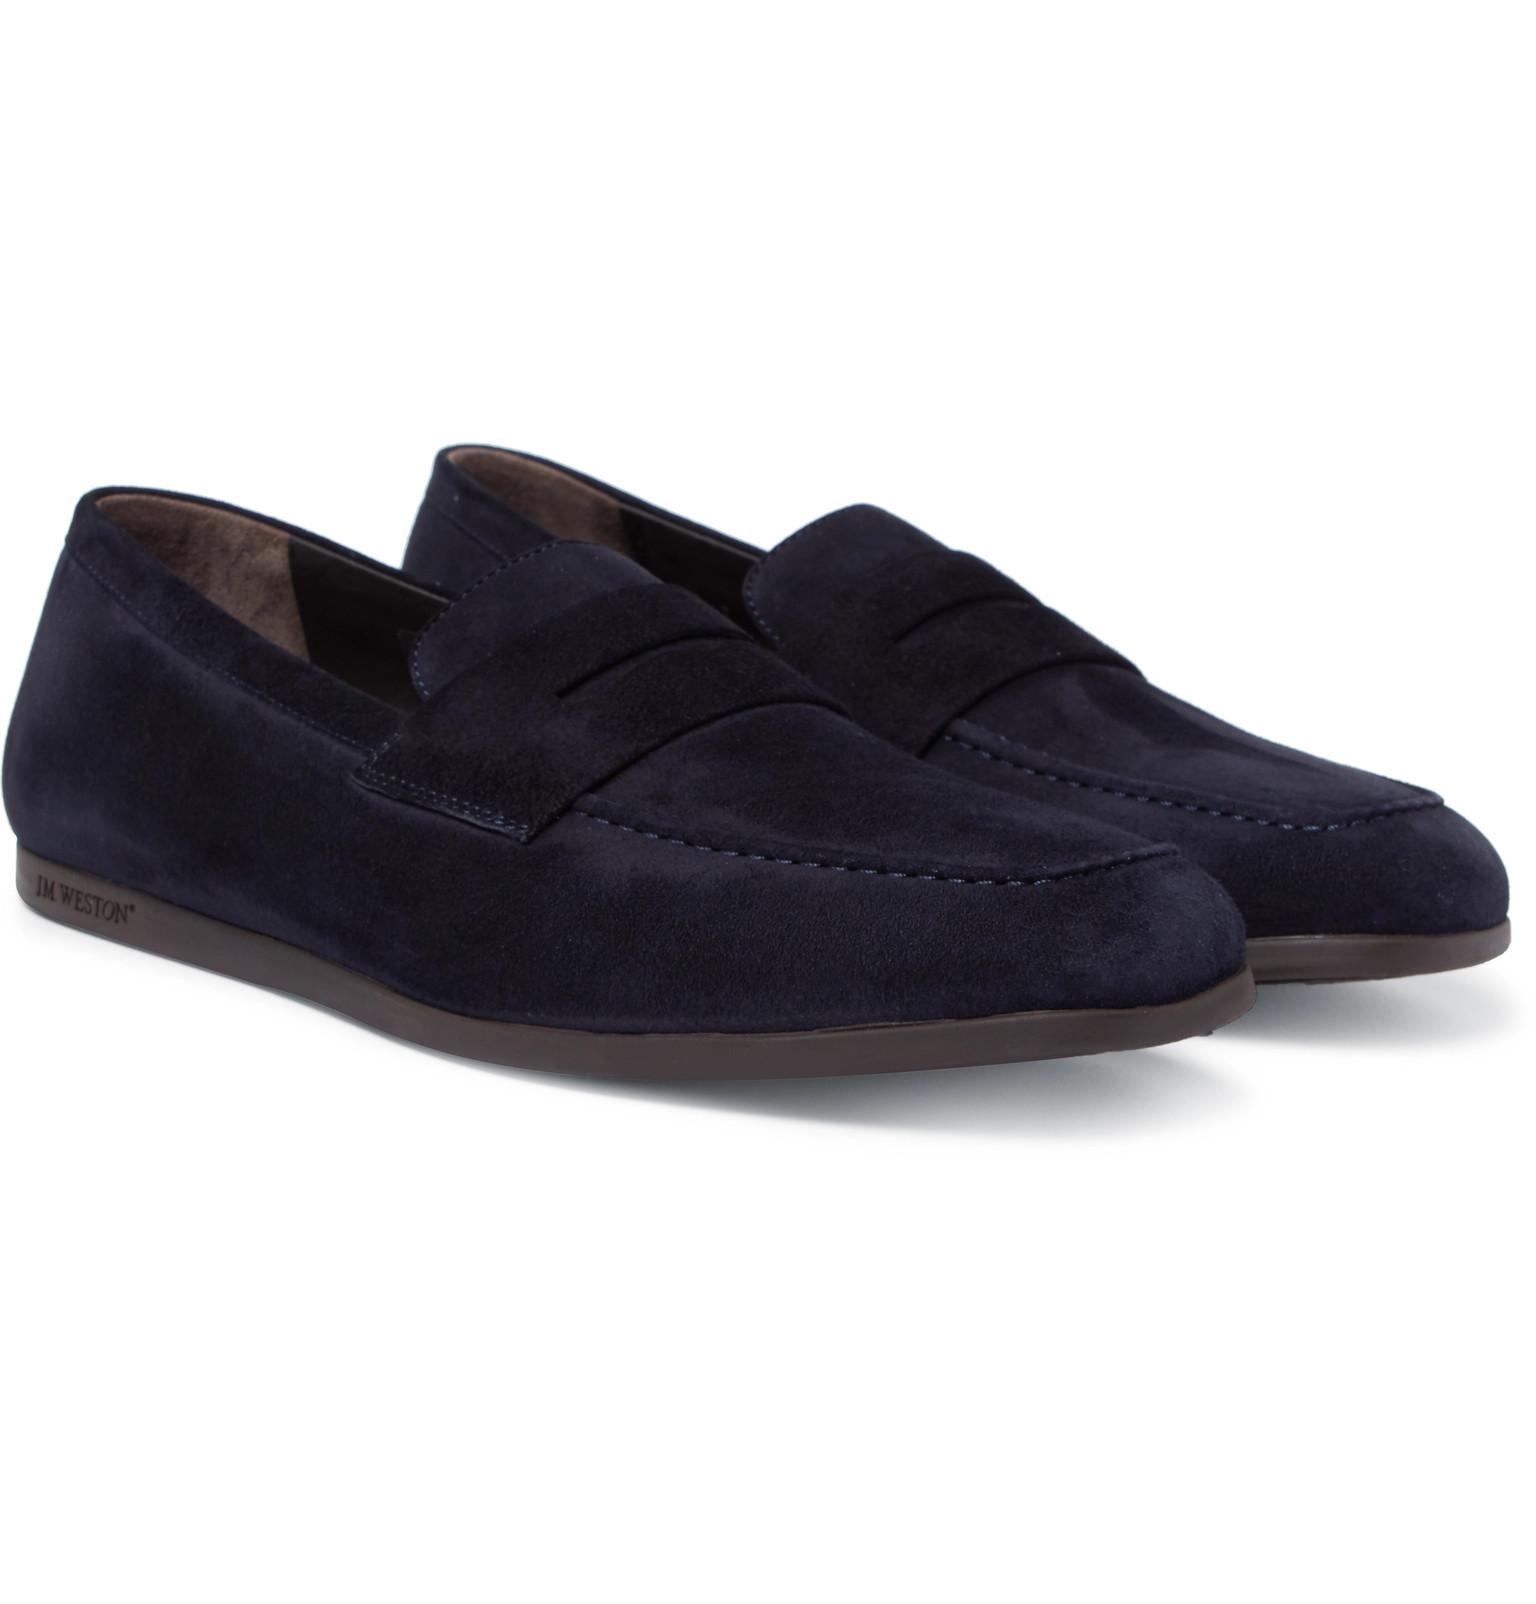 J.M. Weston Suede Penny Loafers in Navy (Blue) for Men - Save 24% - Lyst